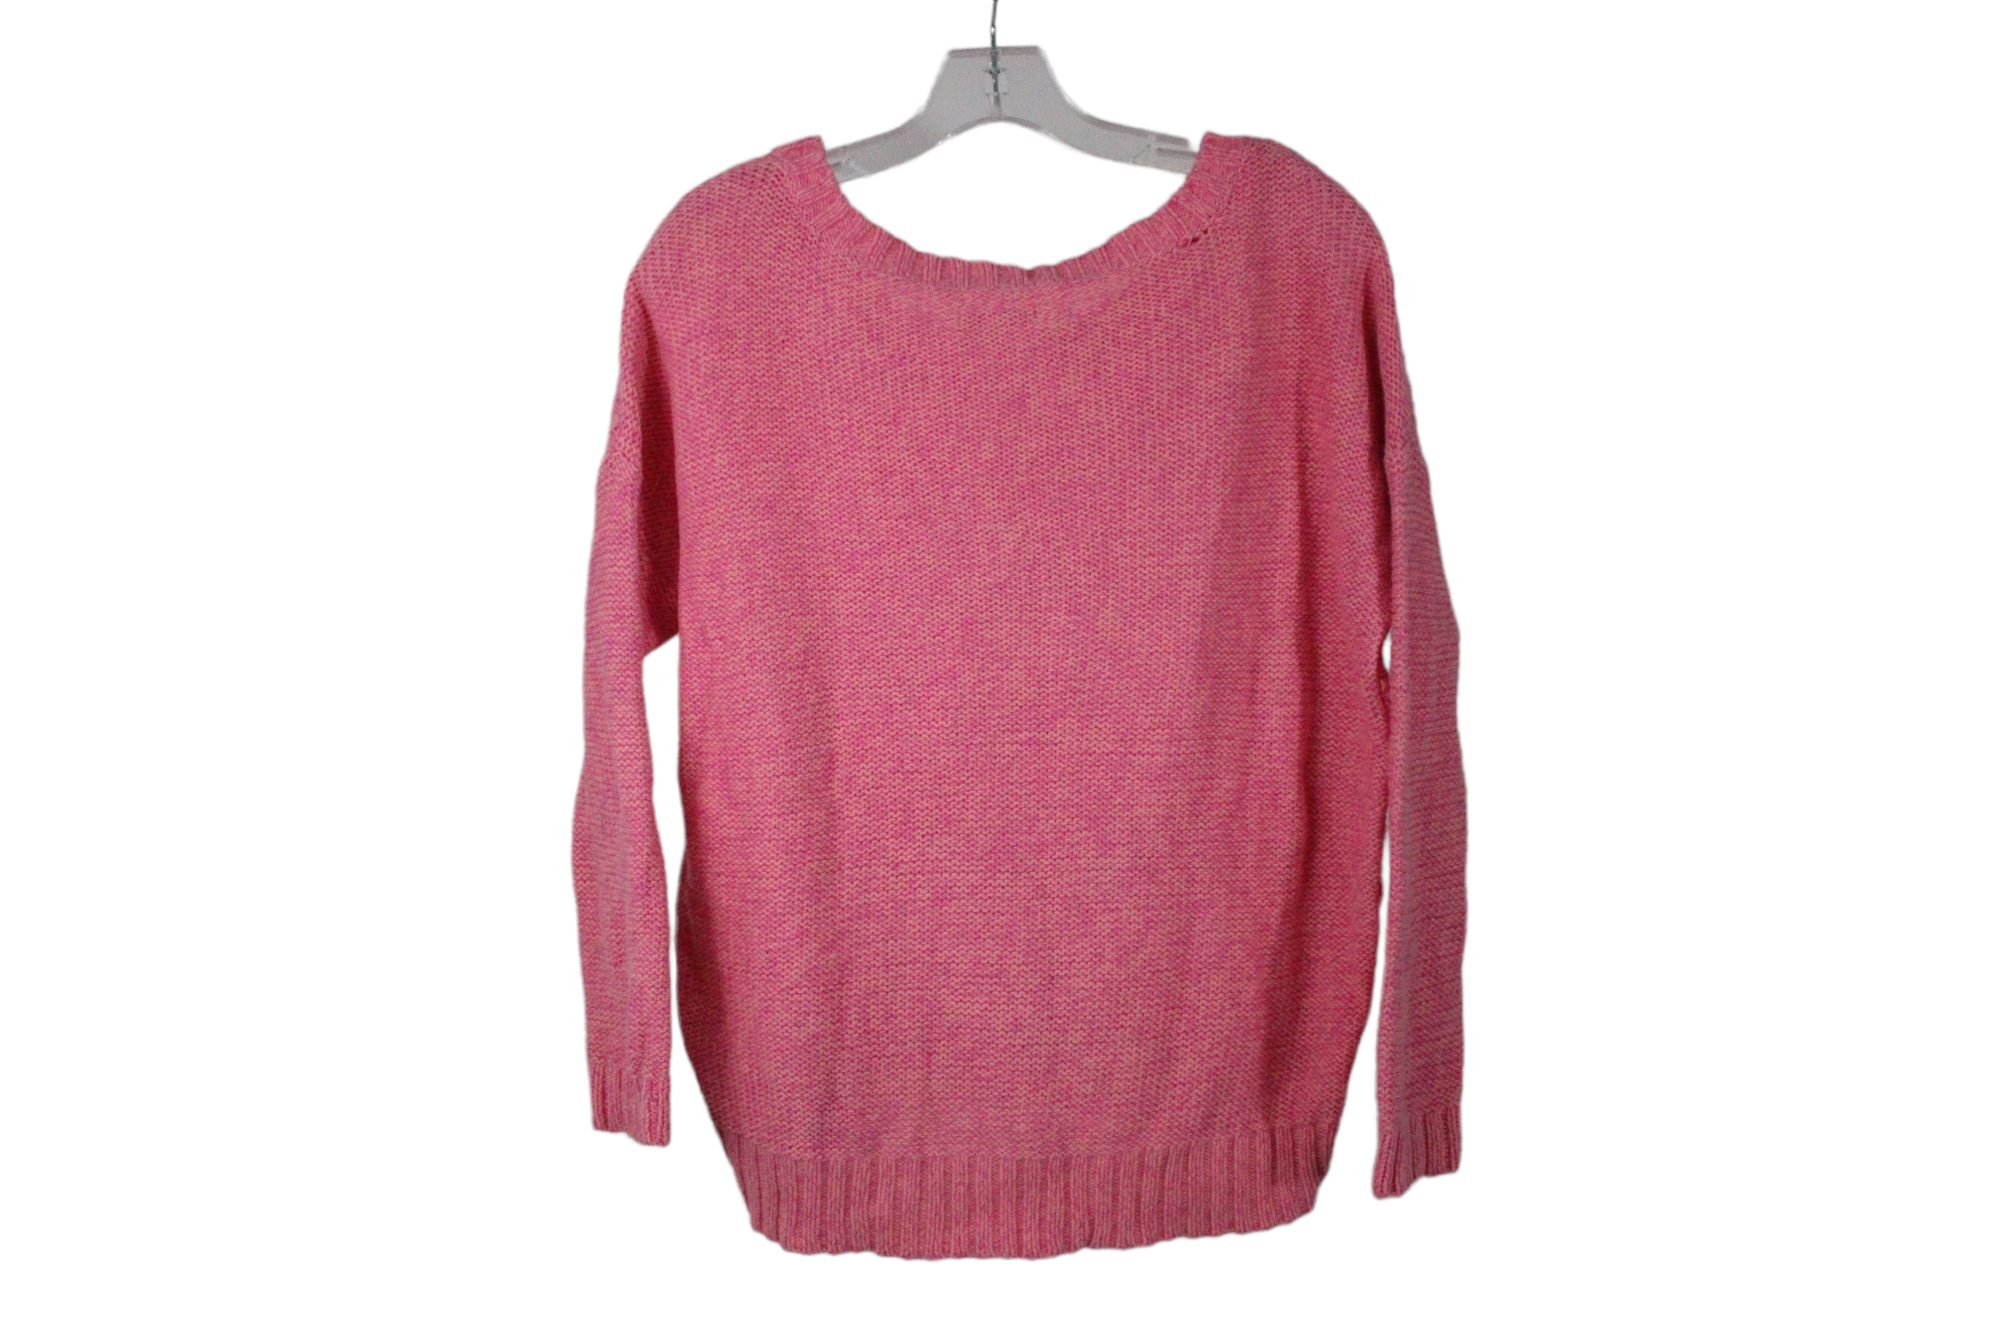 American Eagle Pink Knit Sweater | M